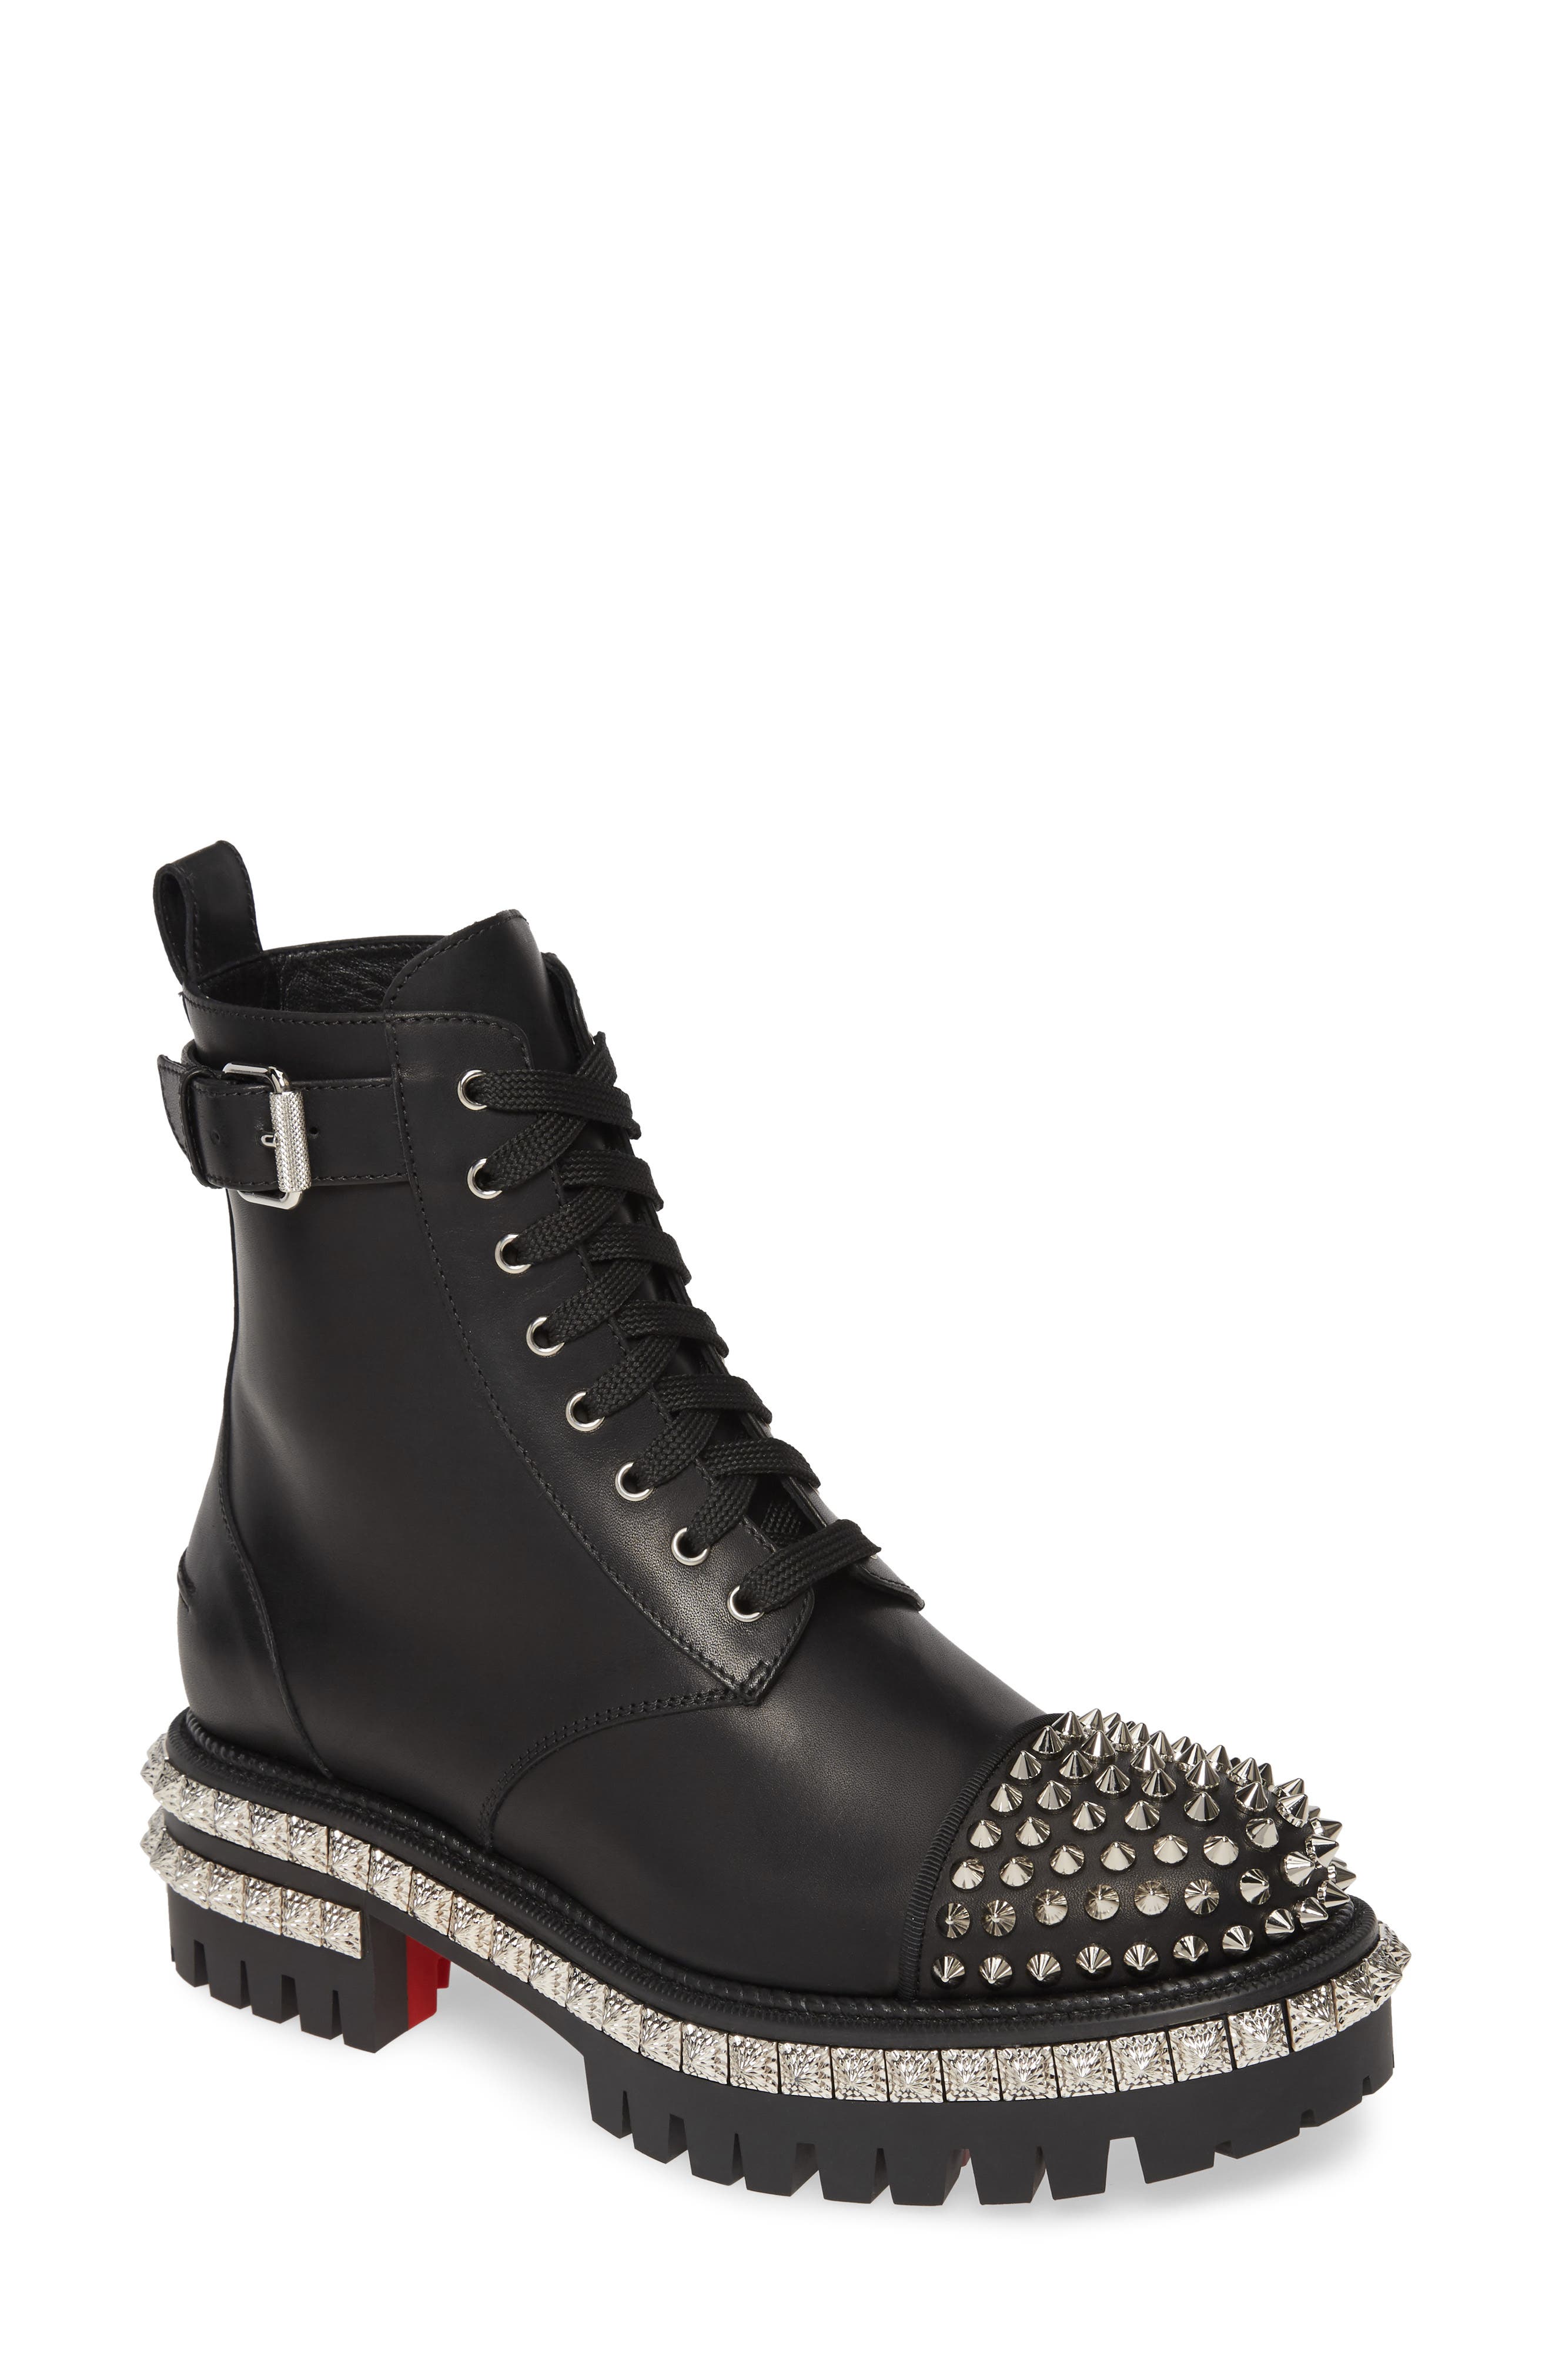 spiked louboutin boots